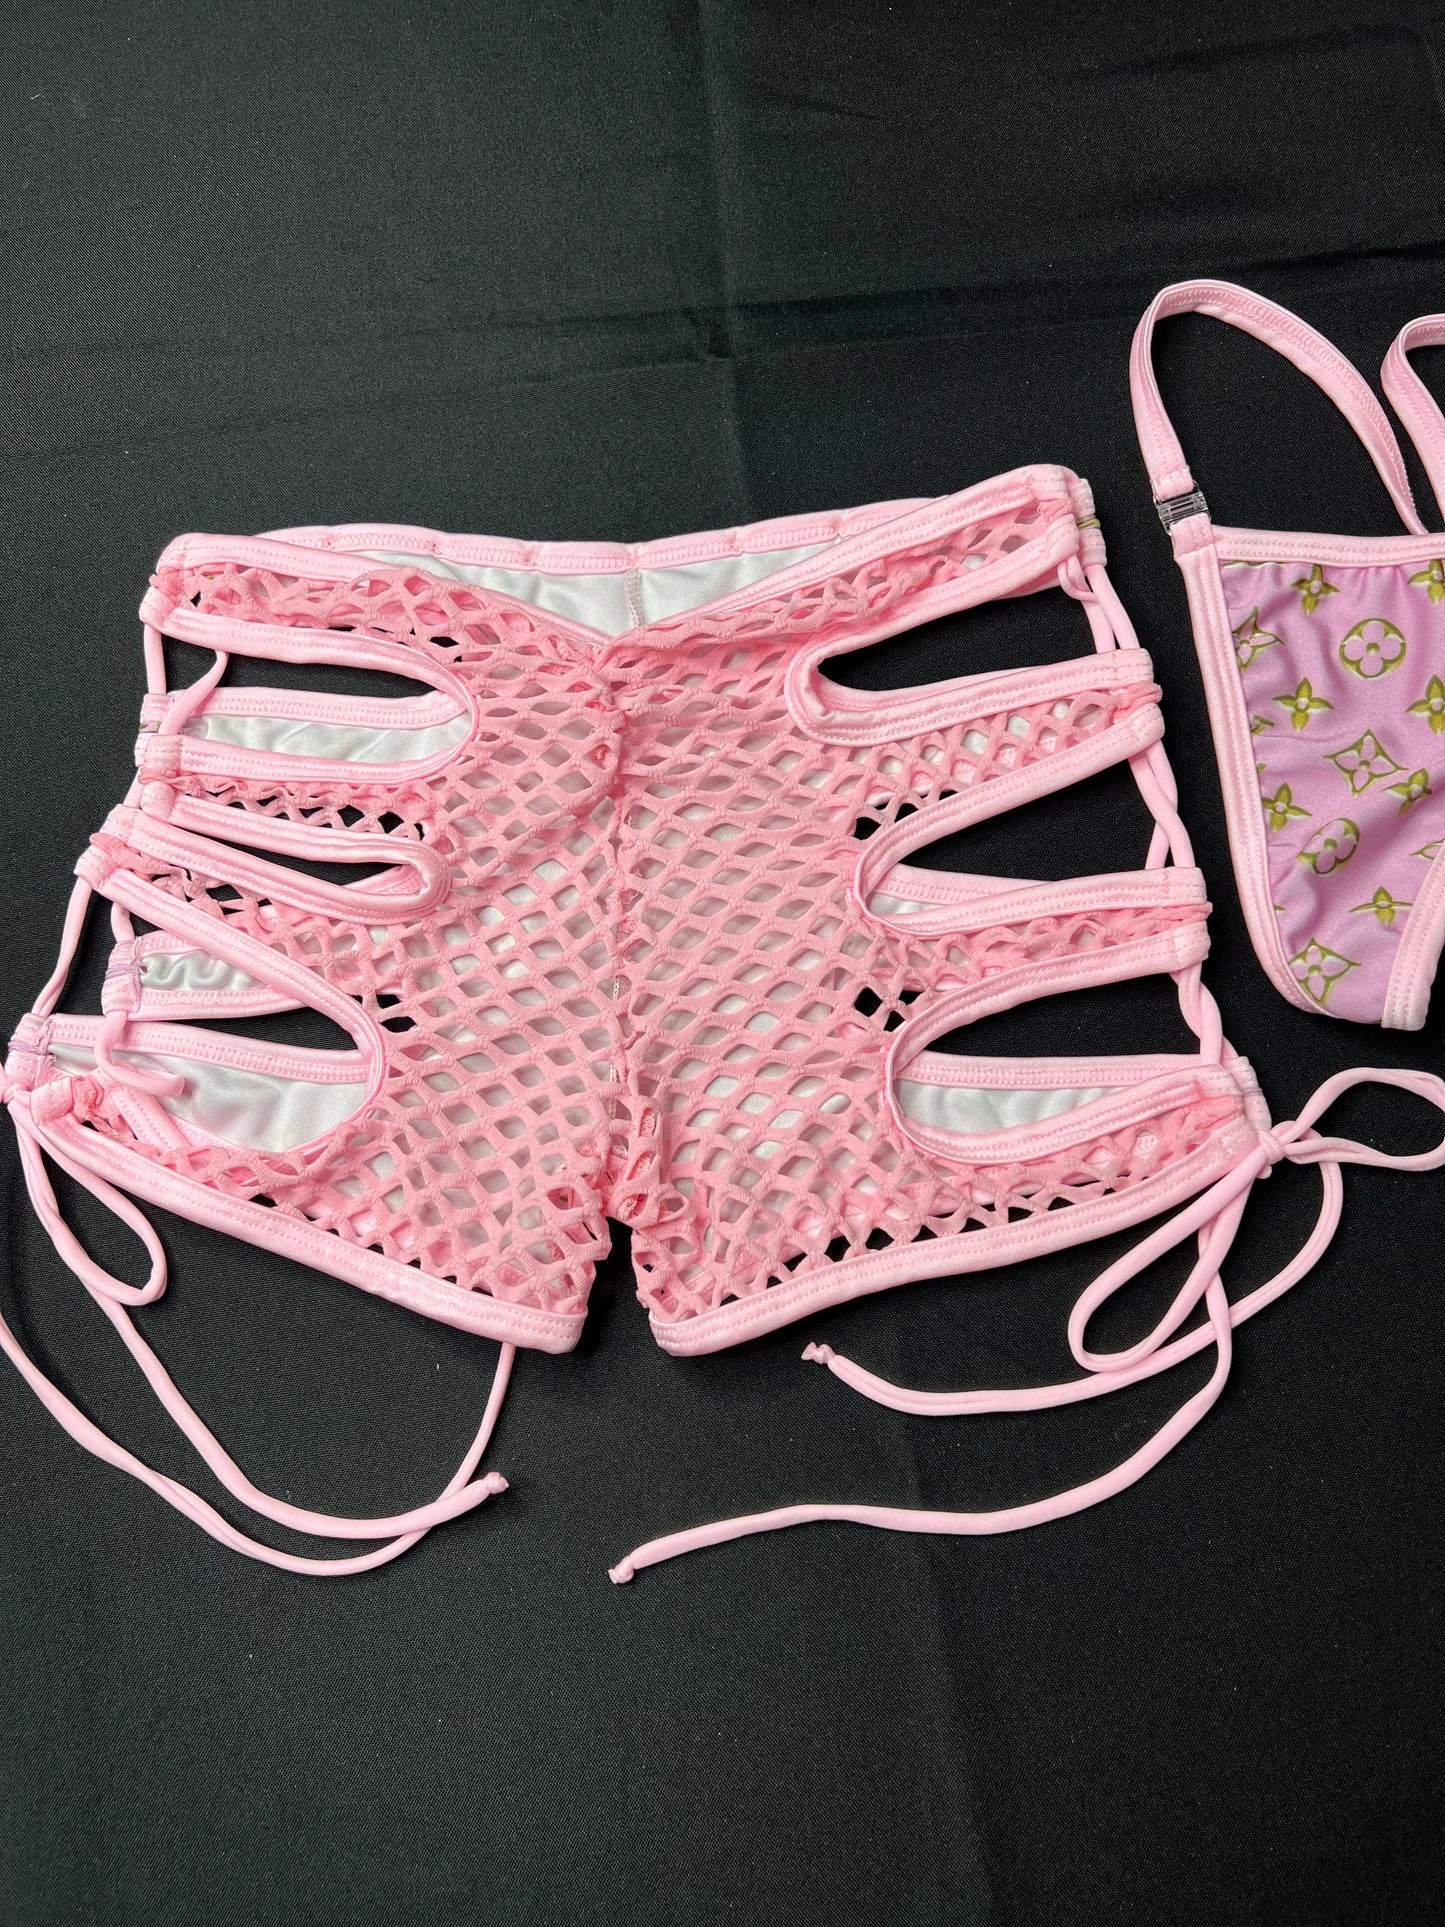 Baby Pink Two-Piece Bikini Top/Shorts Exotic Dancer Outfit